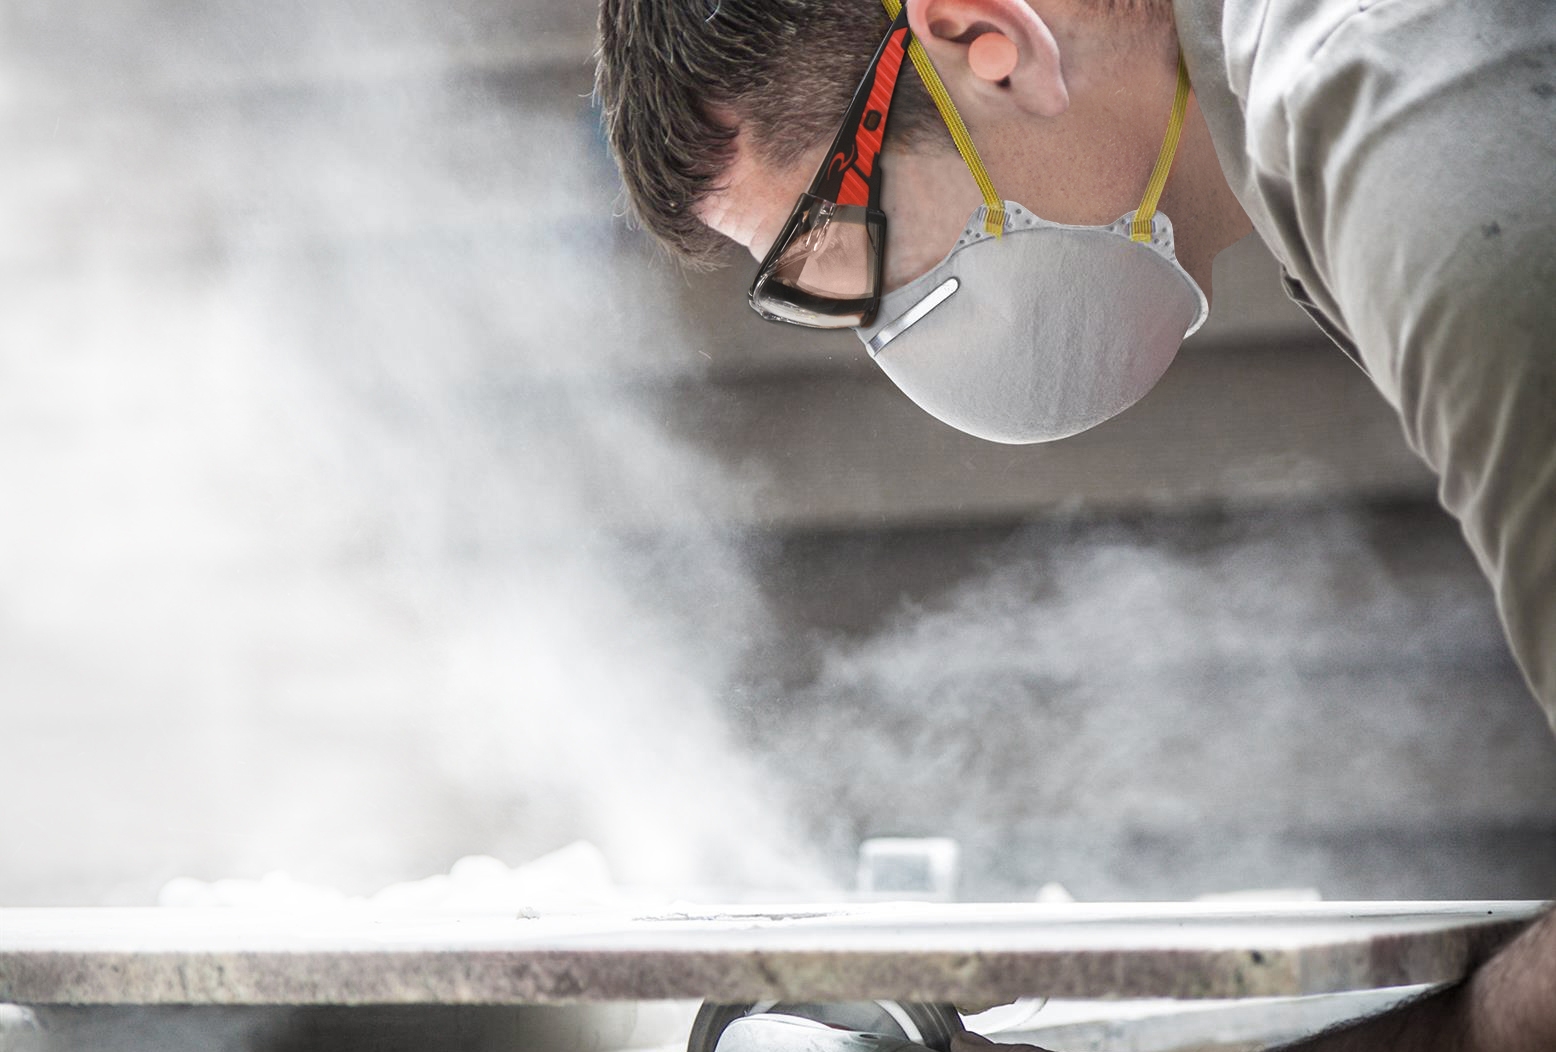 photo of a man wearing goggles and a mask sanding down metal